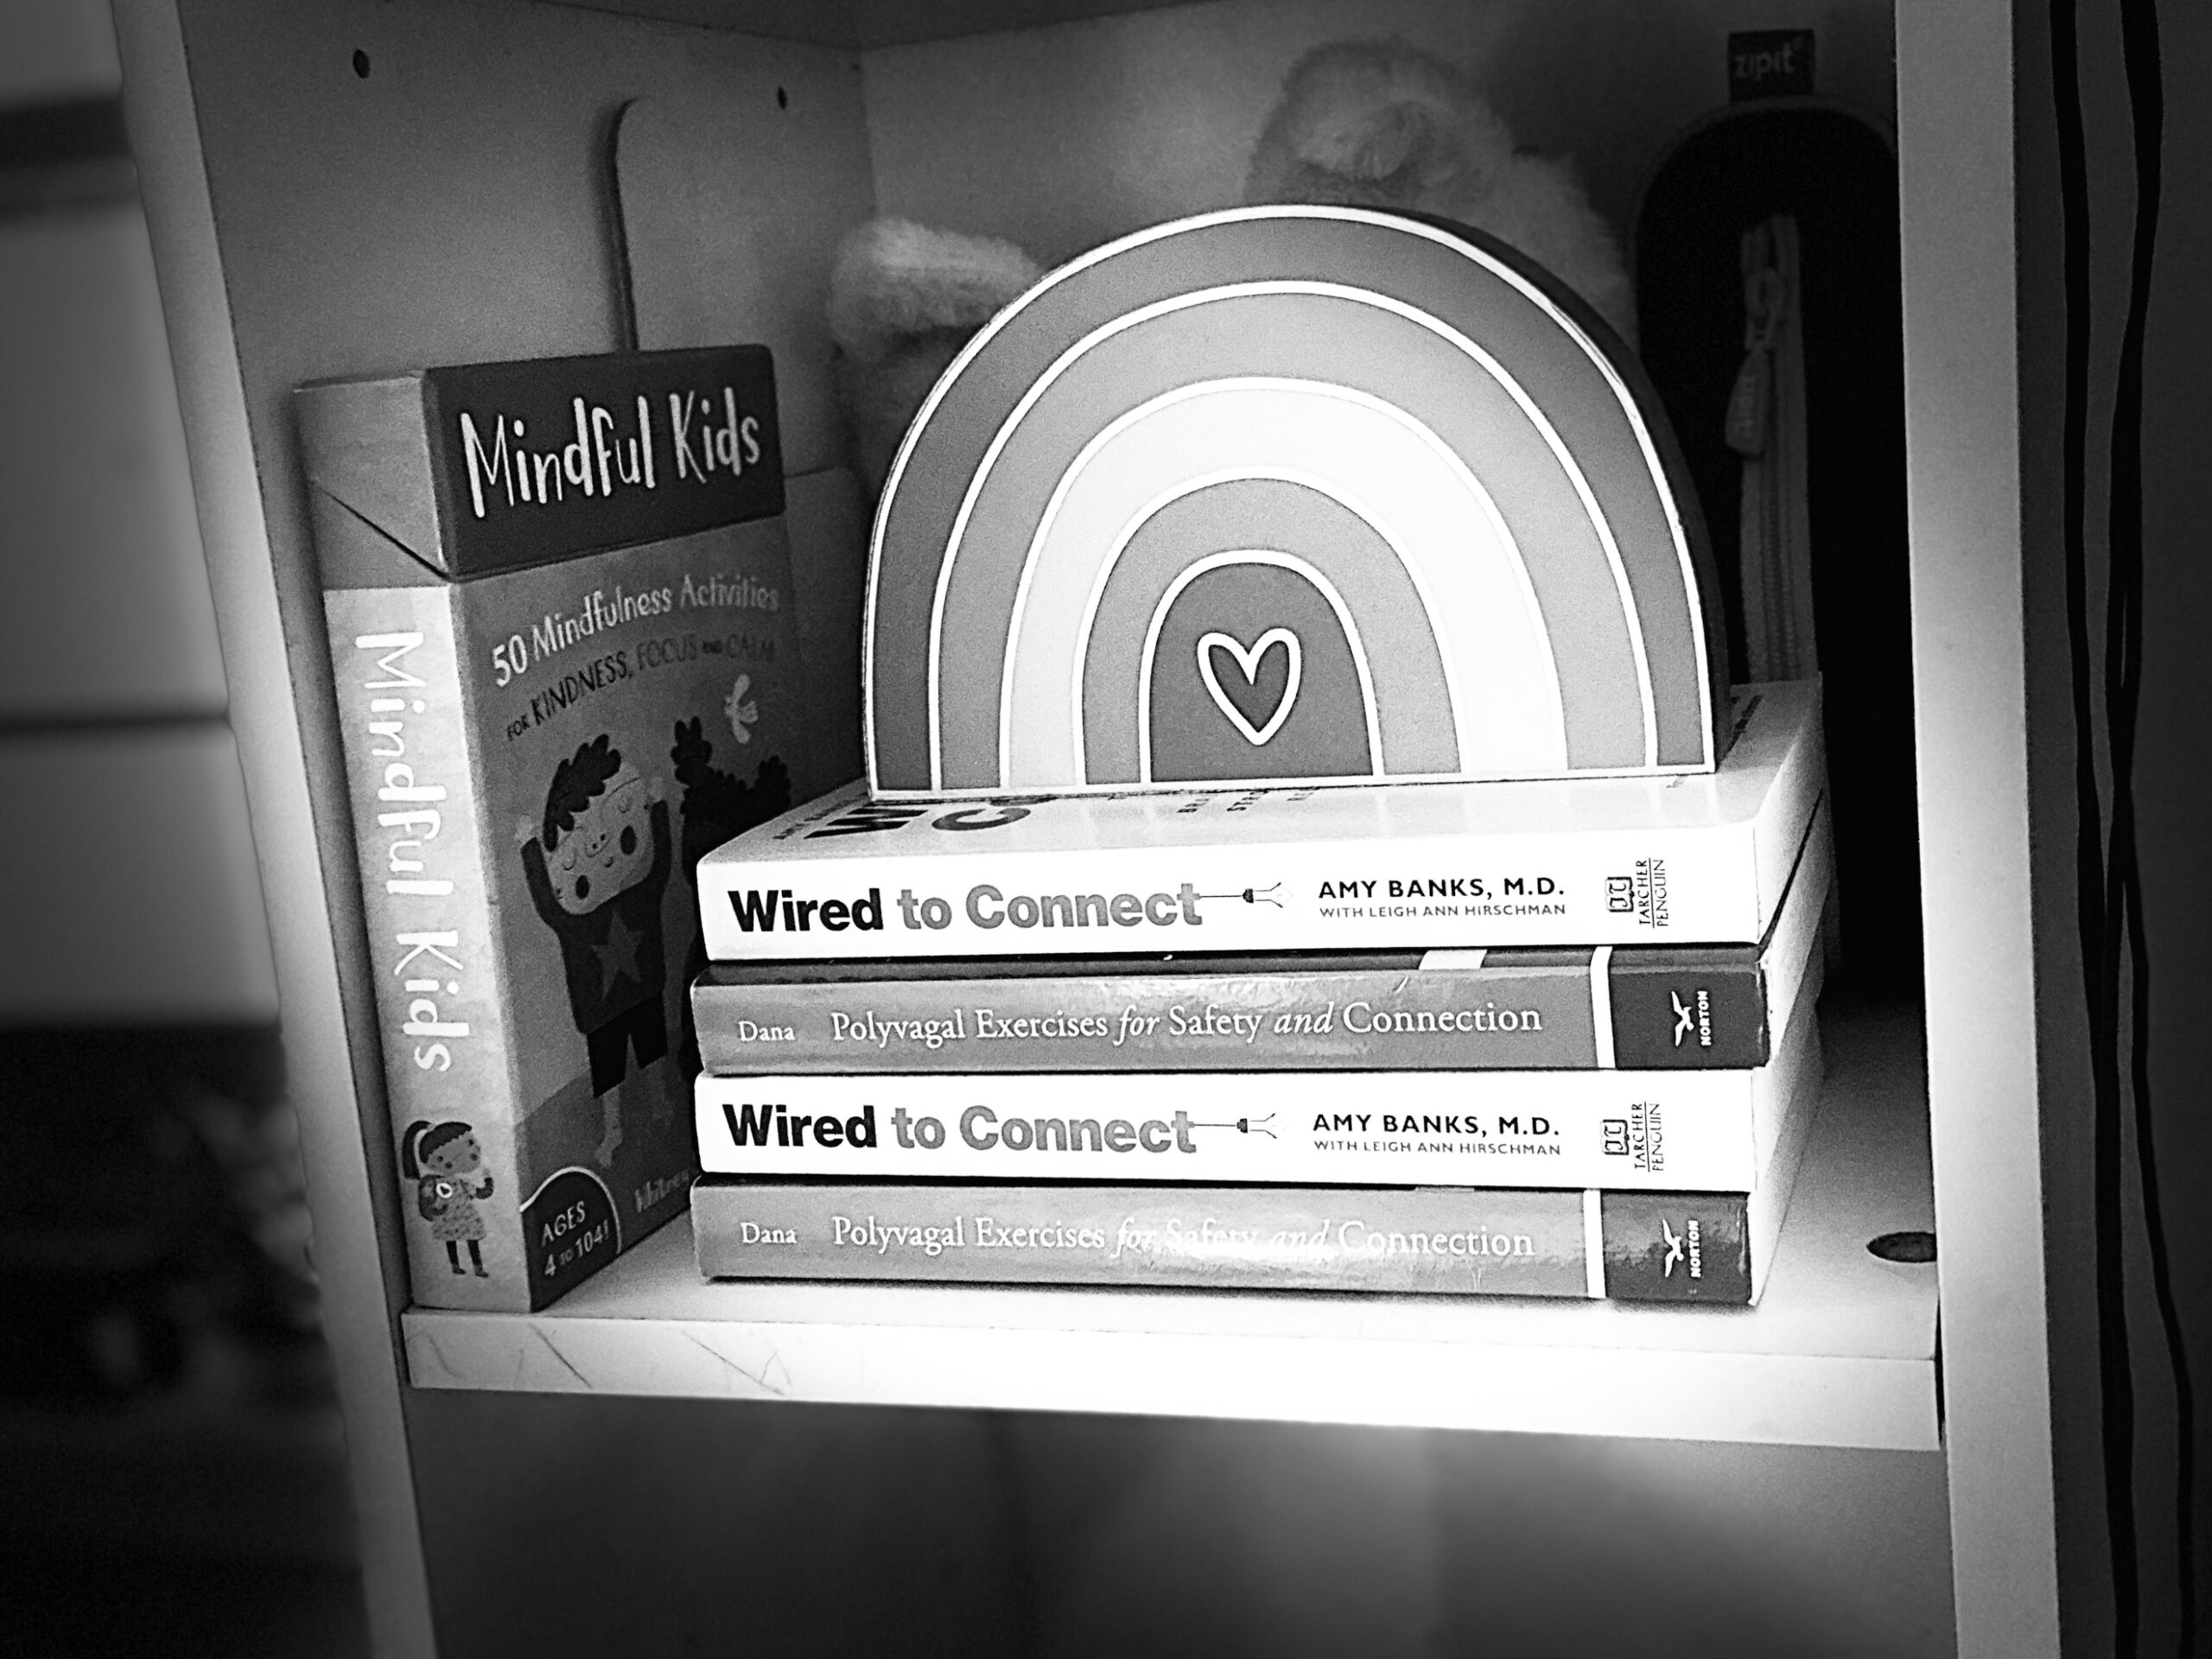 copies of the book Wired to Connect with a rainbow on top